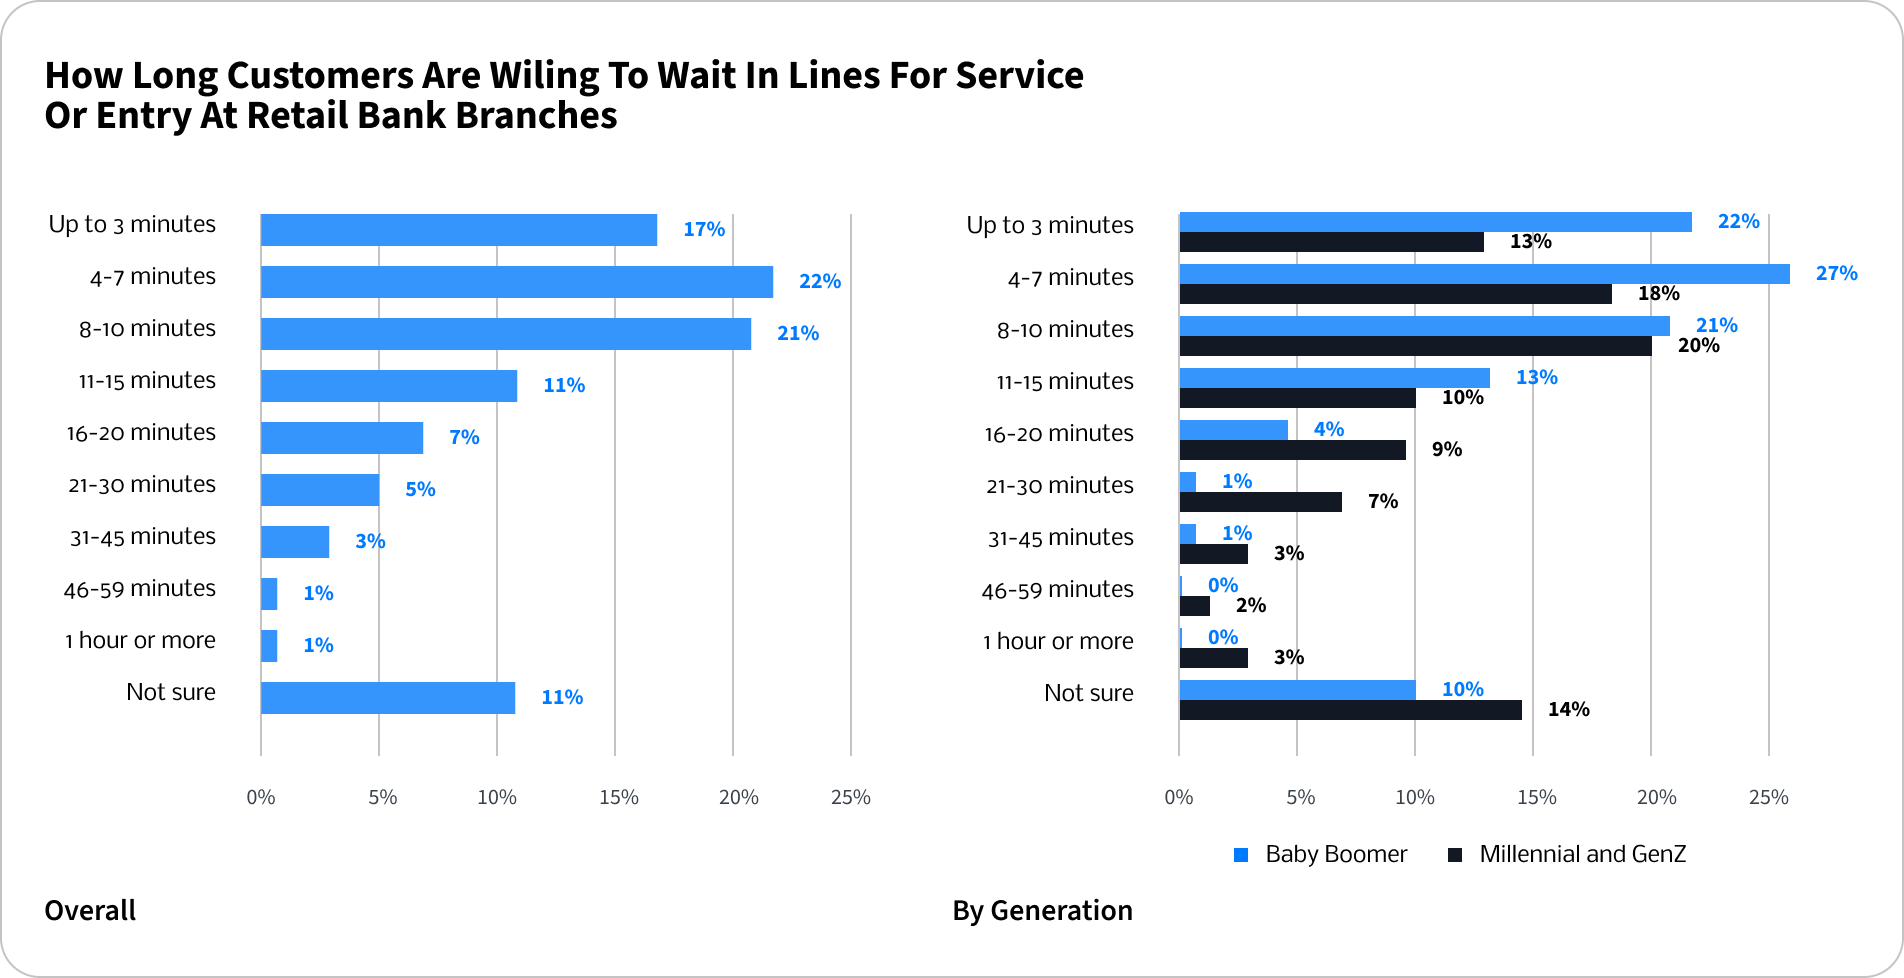 How long customers are willing to wait in lines for service or entry at retail bank branches chart